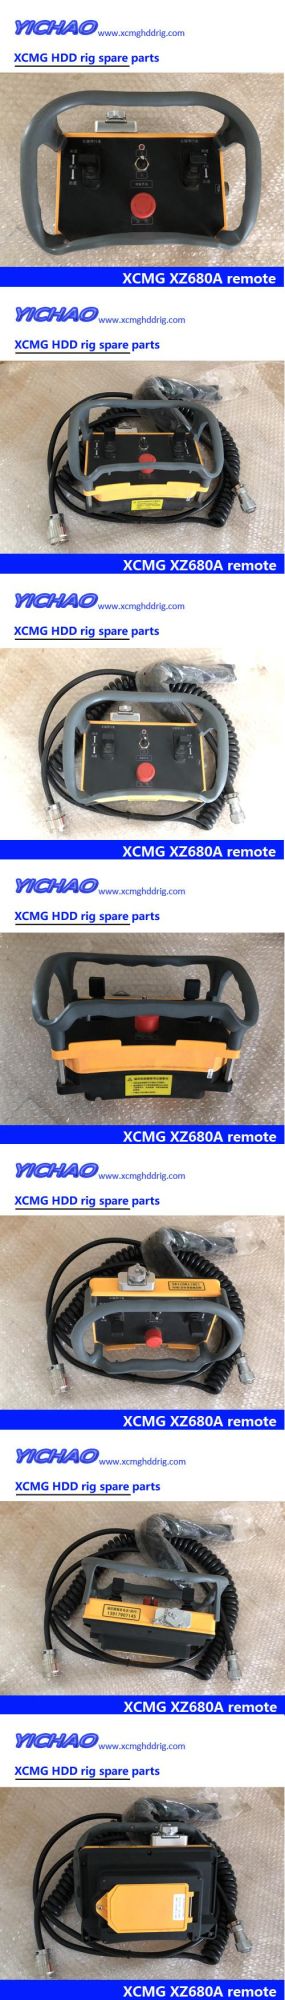 Xz320d/Xz450/Xz450plus/Xz680A/Xz880/Xz1000A/Xz1350/Xz1500/Xz1600/Xz2200/Xz3600/Xz5000/Xz6600/Xz13600 HDD Horizontal Directional Drill Spare Parts Remote